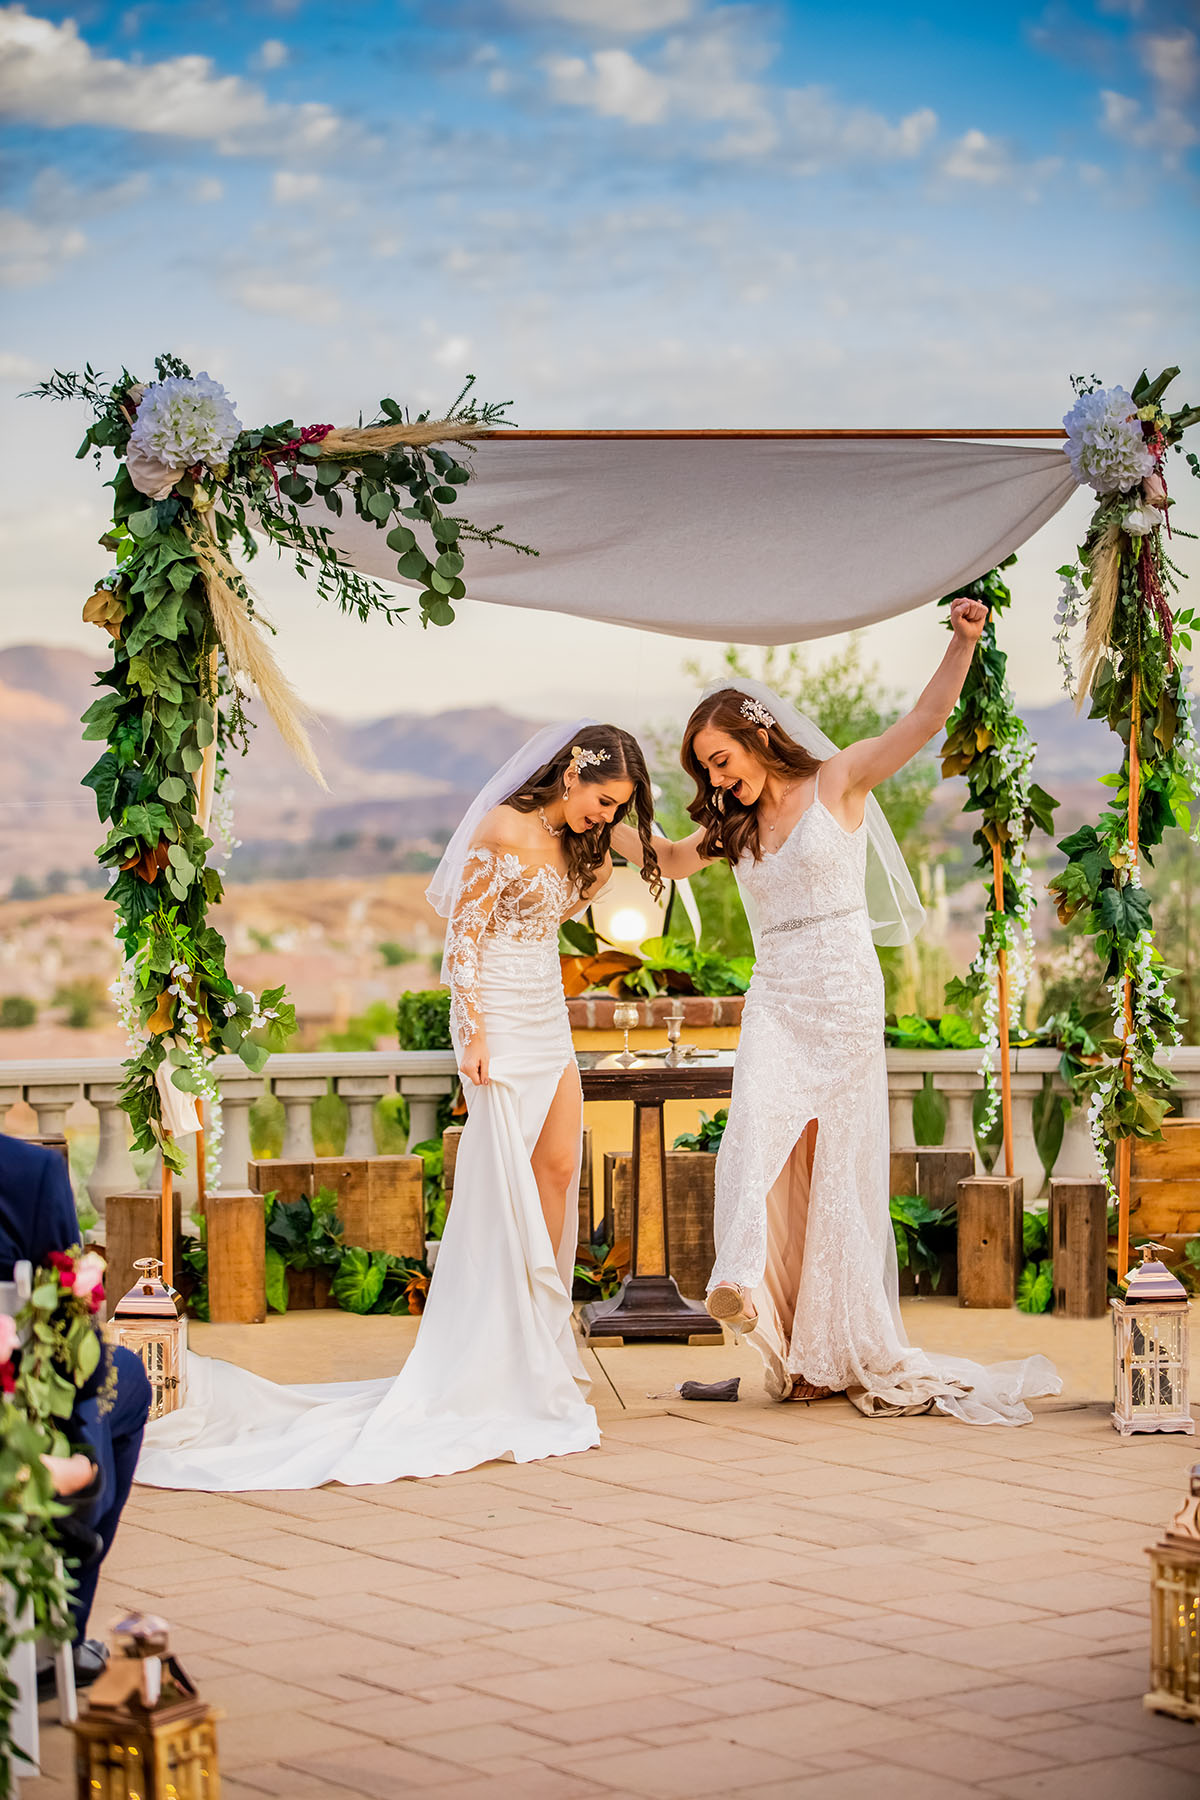 Rustic, elegant fall mountain wedding with interfaith Jewish ceremony LGBTQ+ weddings two brides Mrs. and Mrs. luxury lesbian wedding Southern California palm trees vows ceremony